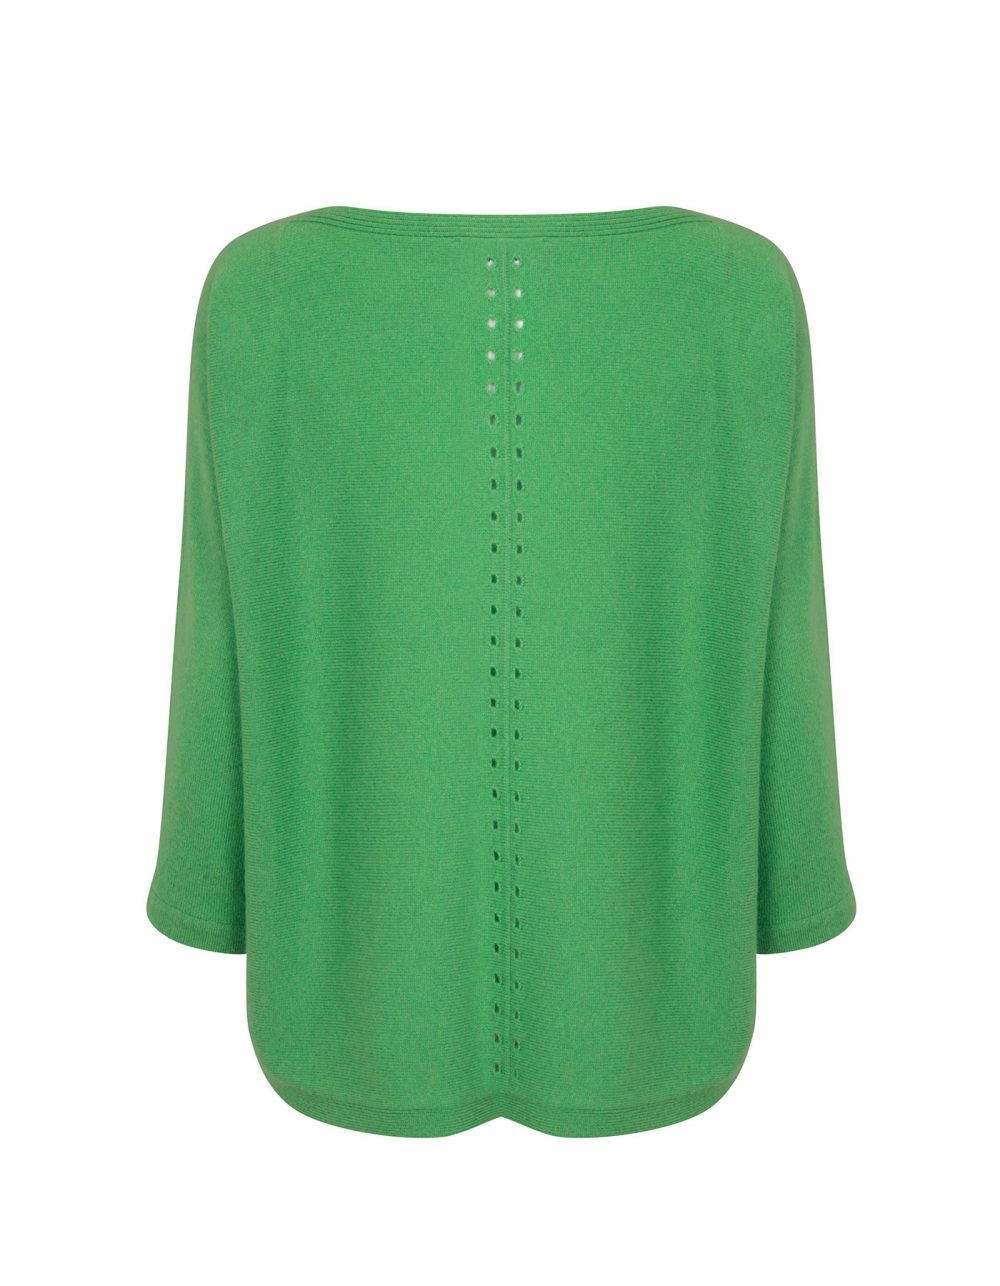 Back view of a palm jumper in green, part of the malin darlin range of designer cashmere jumpers, on a white background.